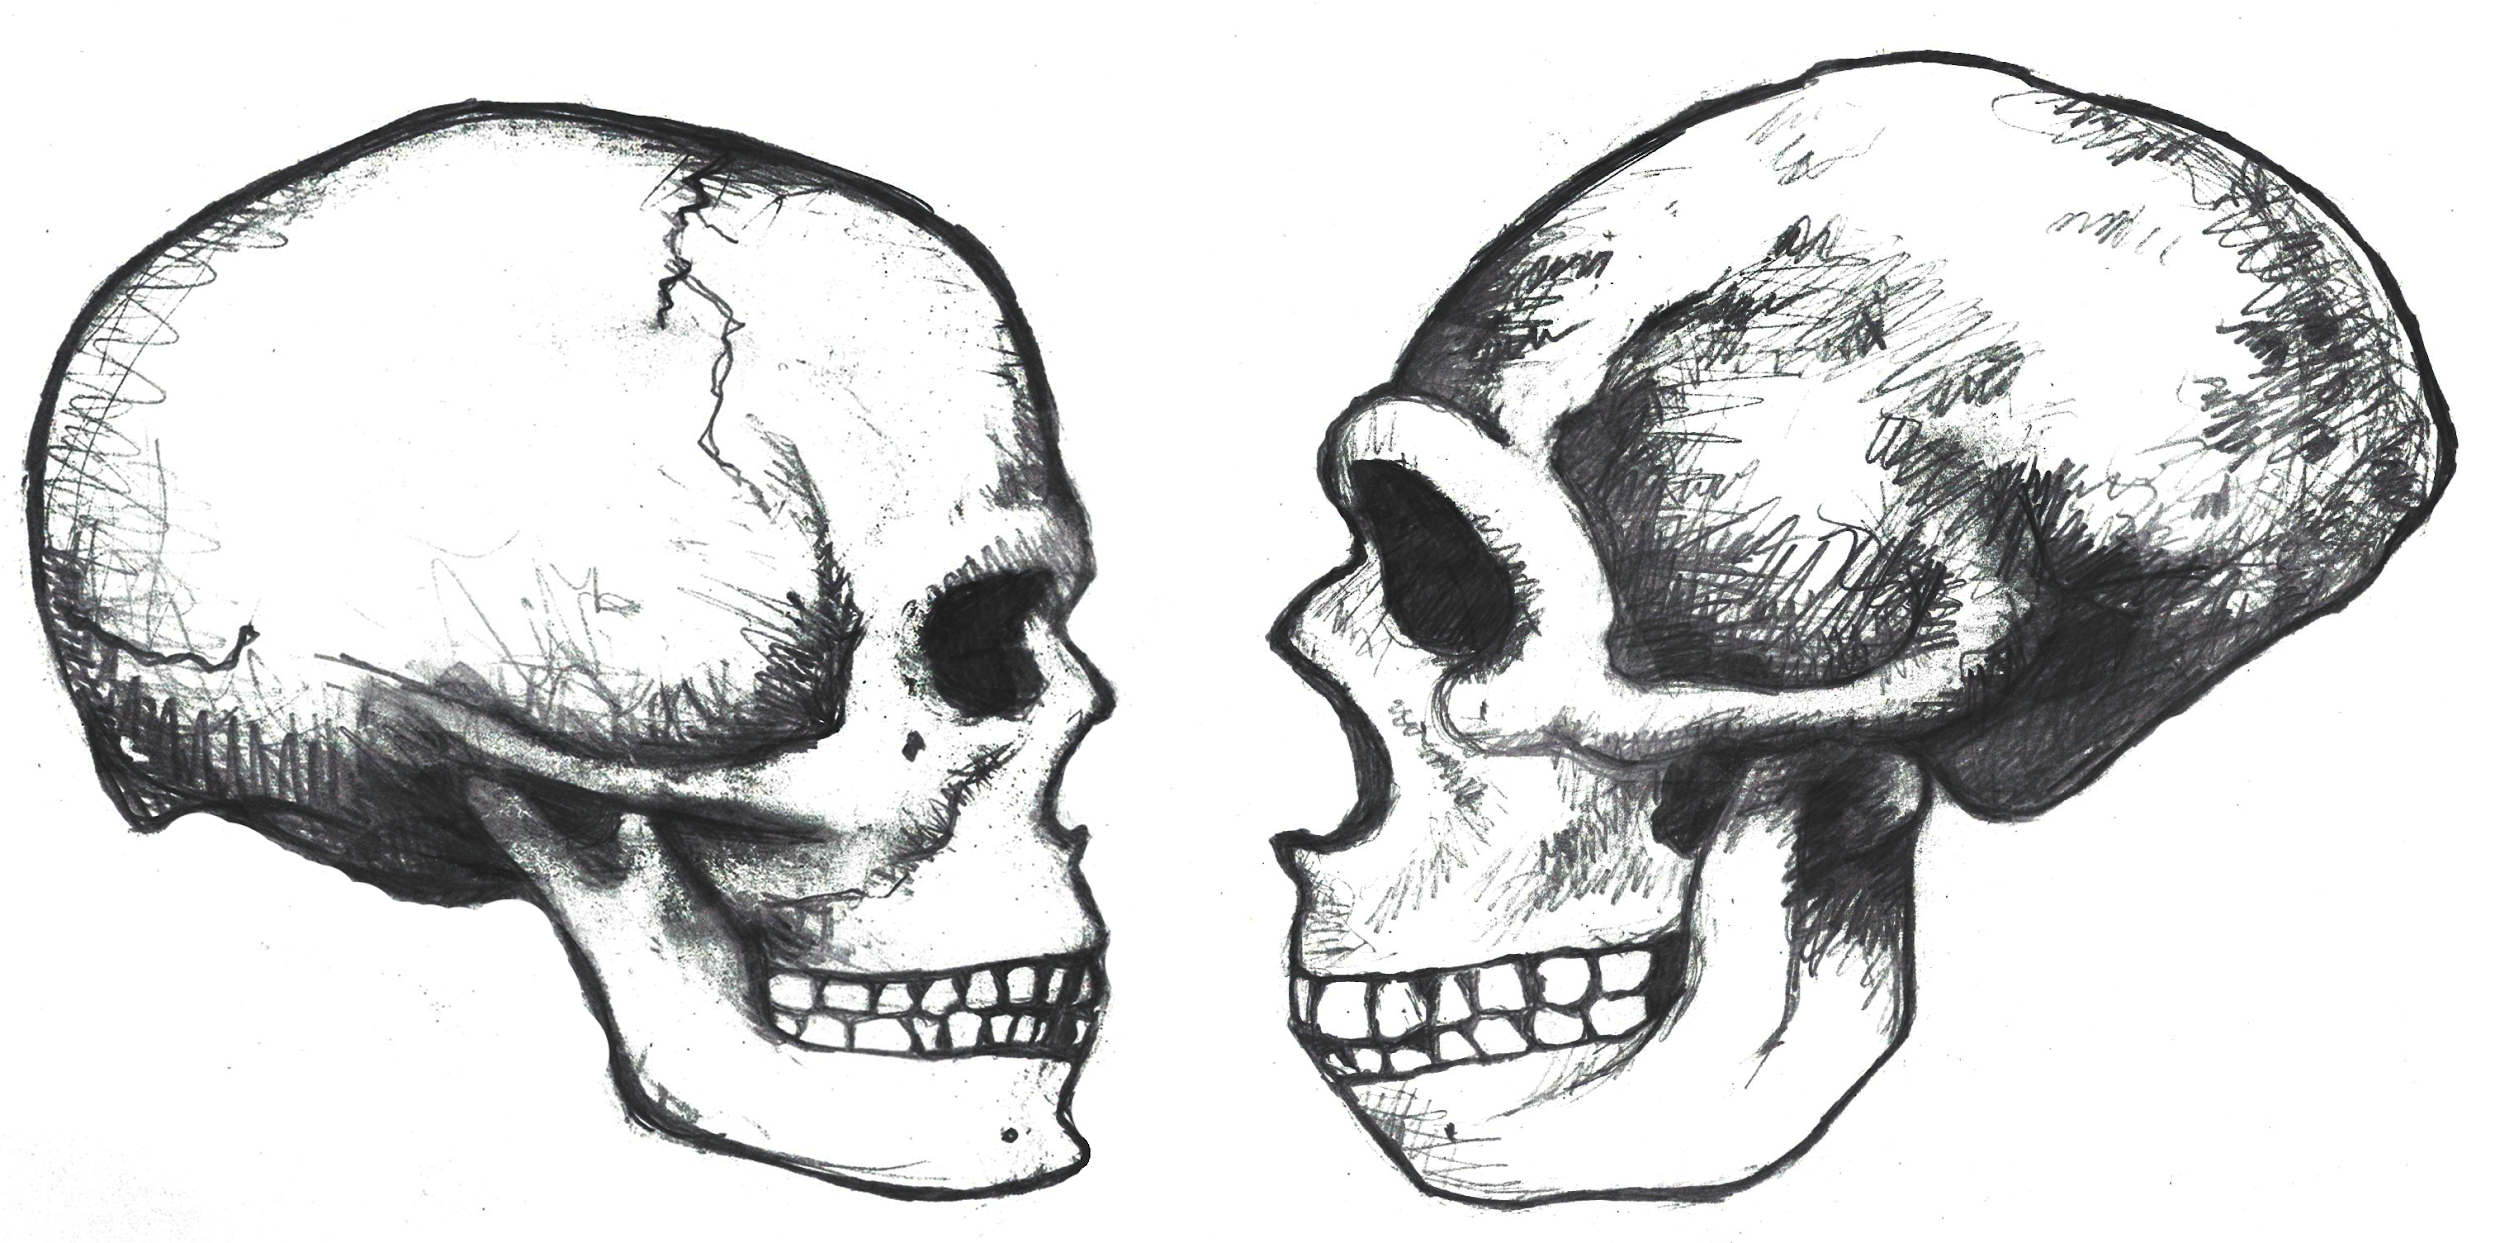 A rounded skull facing a robust skull with sloping forehead.